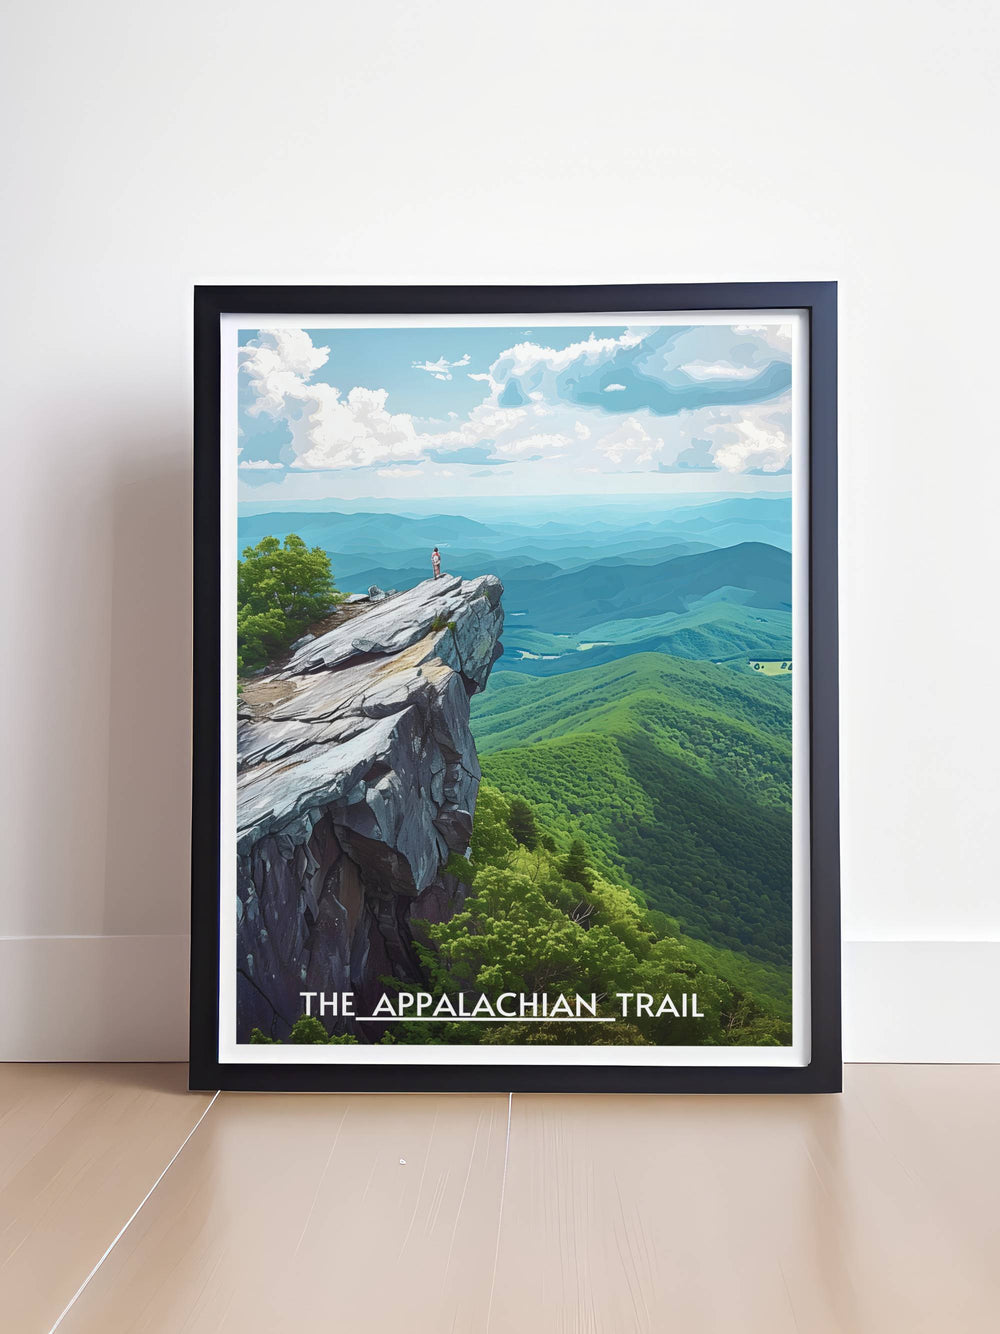 Mcafee Knob artwork featuring the panoramic views of the trail, a great gift for those who cherish outdoor adventures.